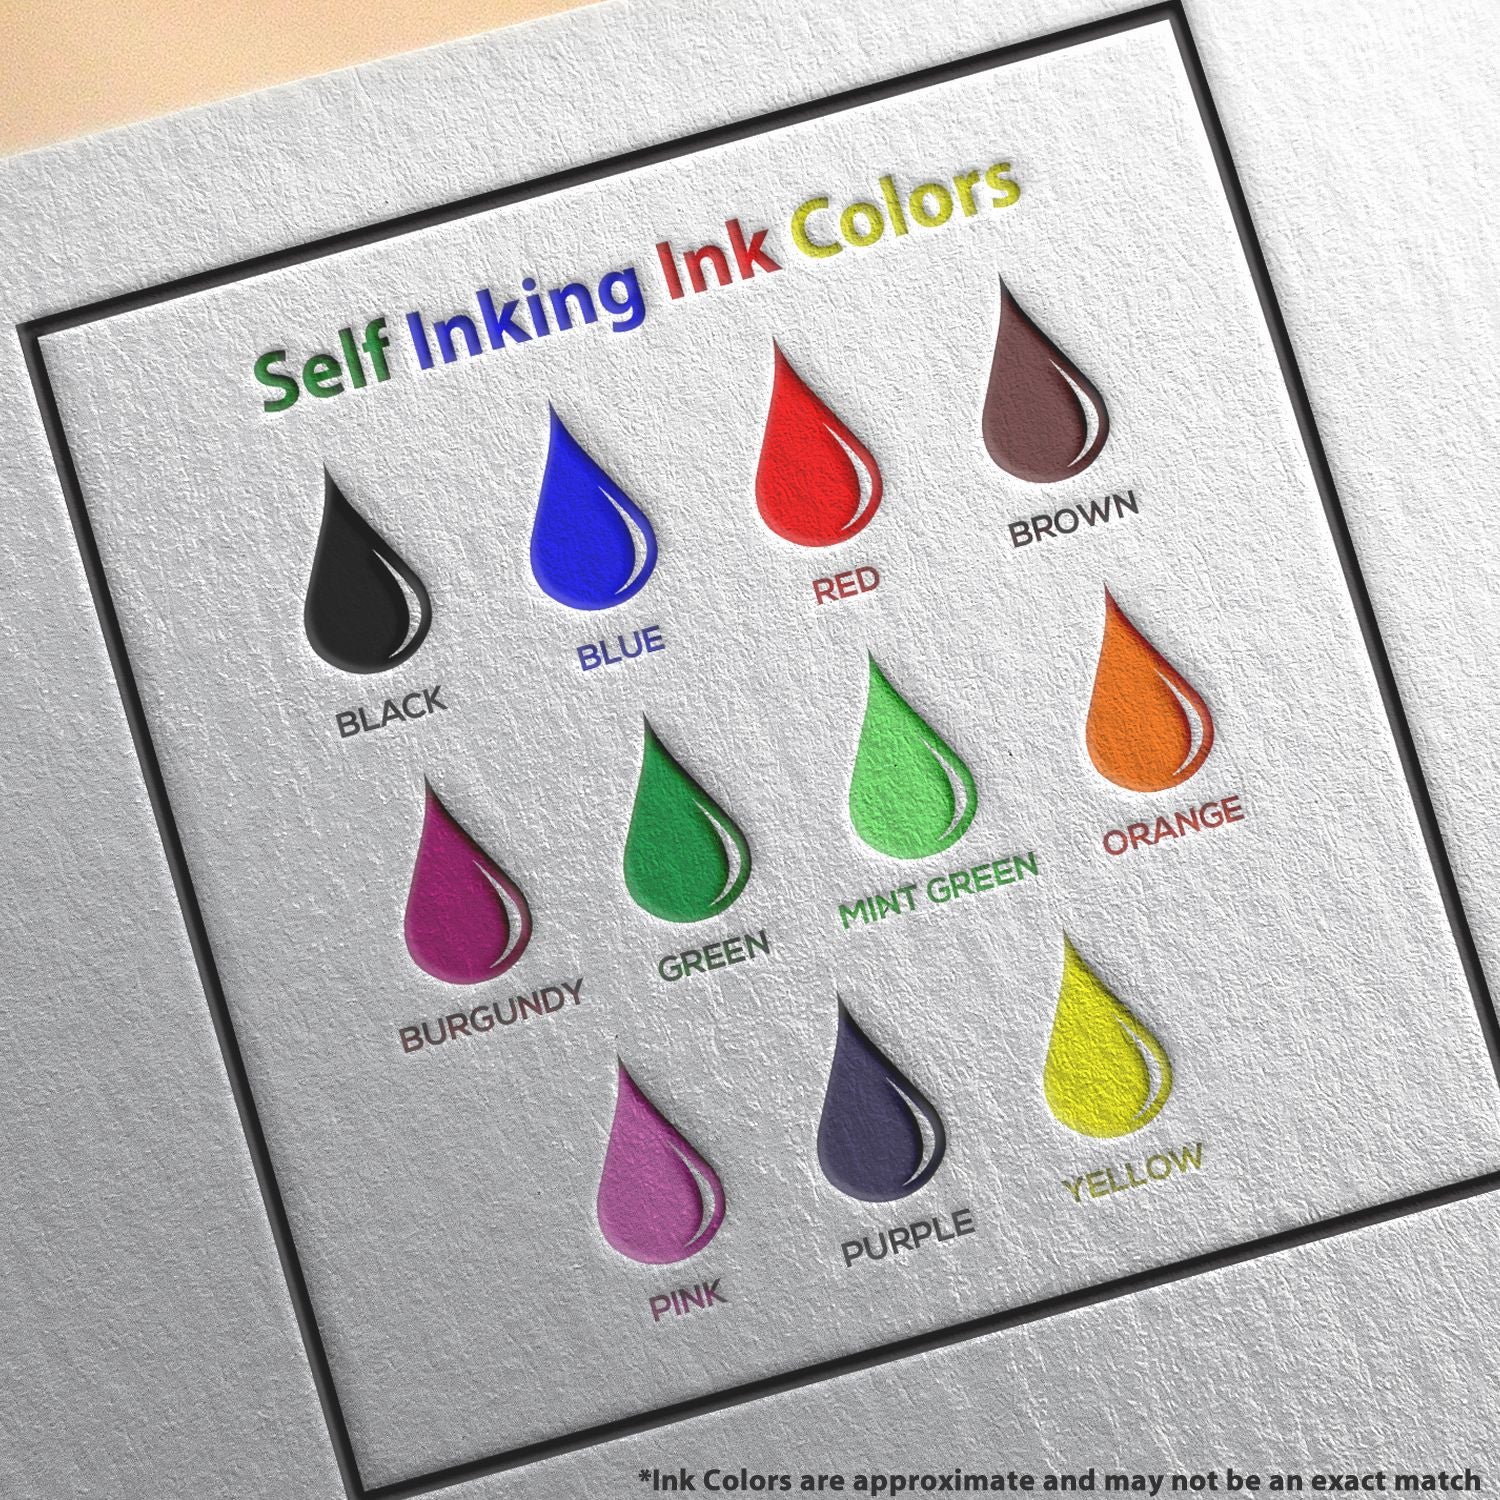 A picture showing the different ink colors or hues available for the Self-Inking Idaho Landscape Architect Stamp product.